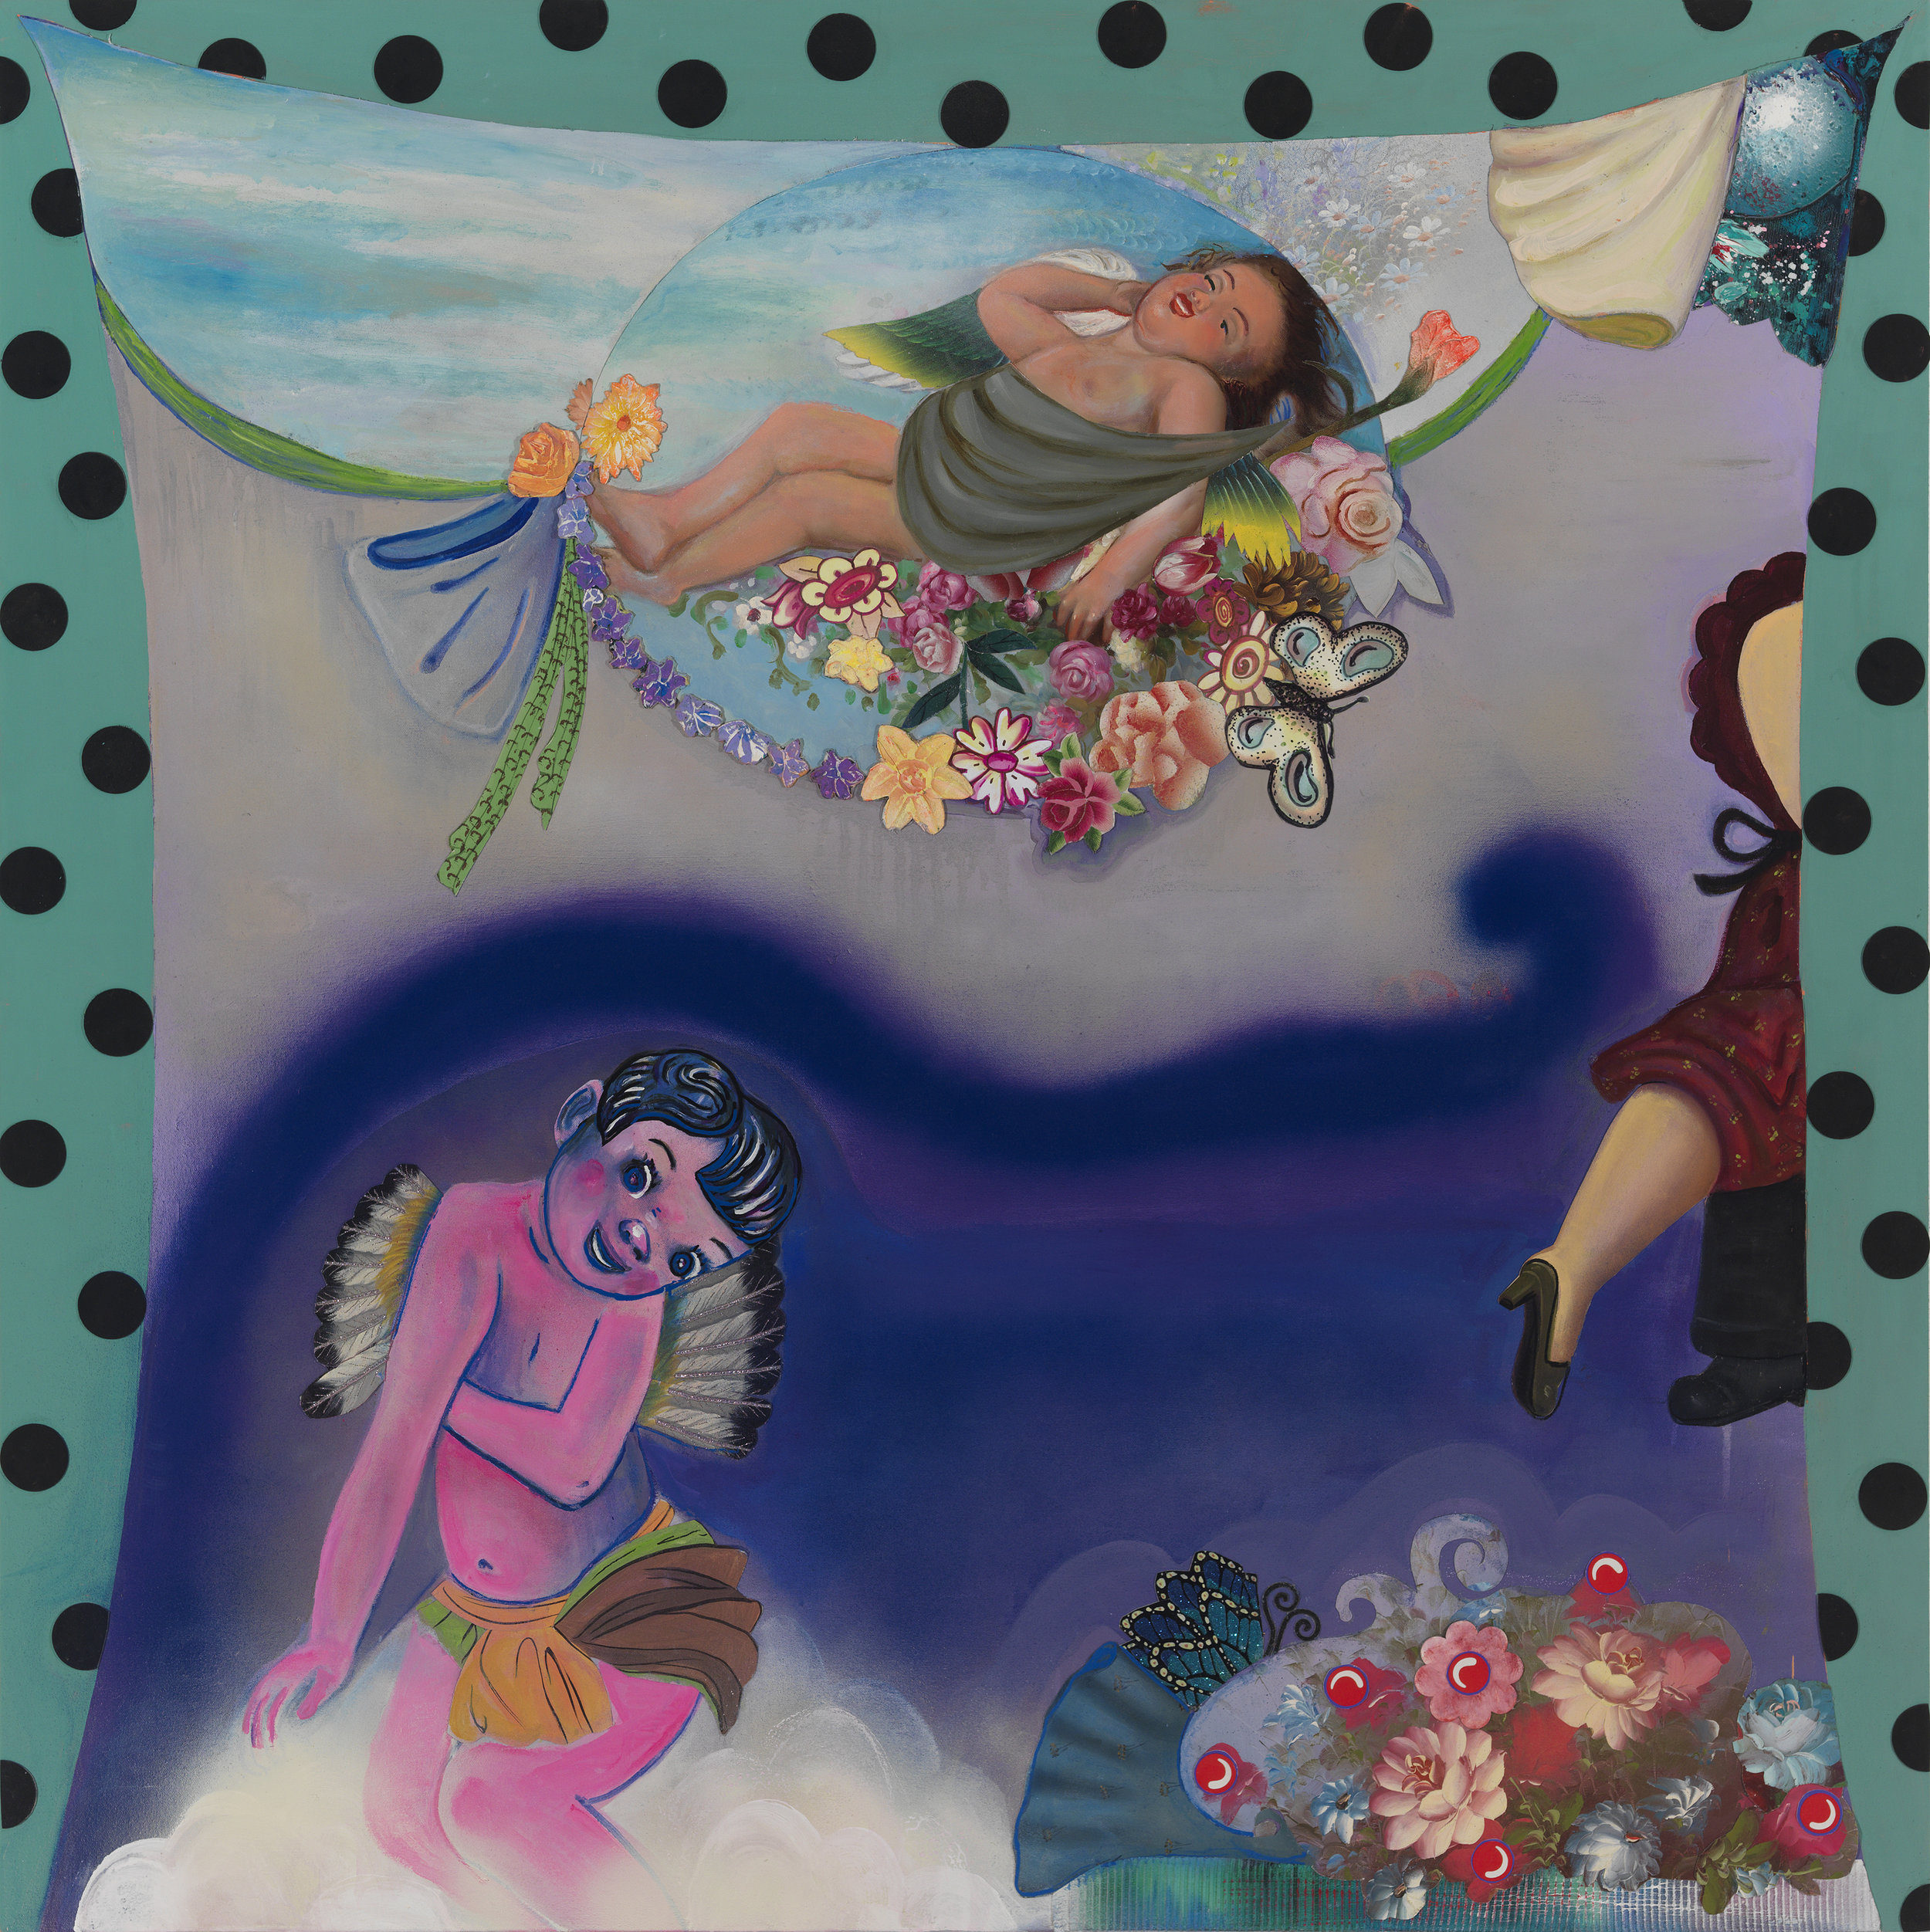 Lazy Cupids (modern love), 48" × 48", mixed media and collage on canvas, 2013